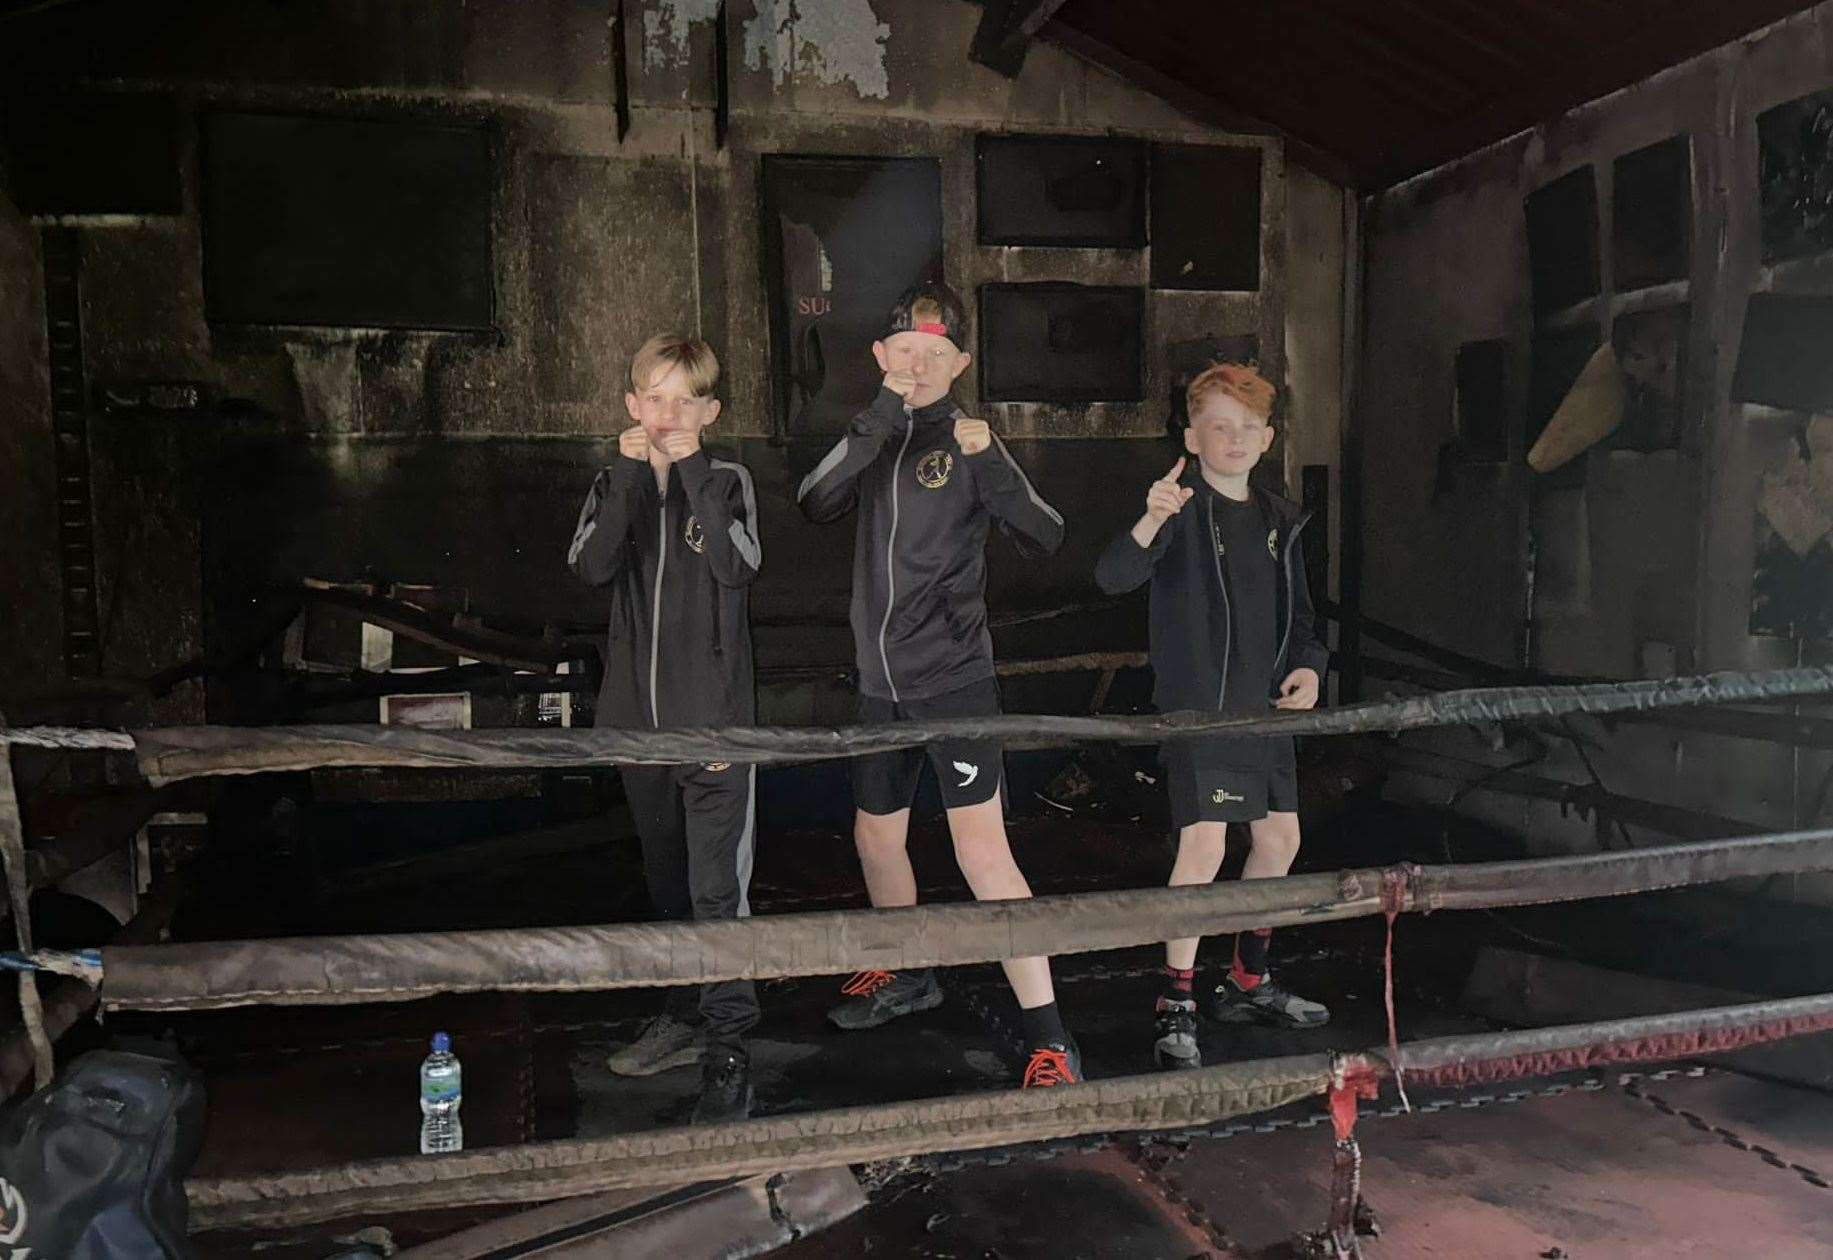 More than 140 children and adults used the now destroyed gym. Picture: ABC Boxing Stables